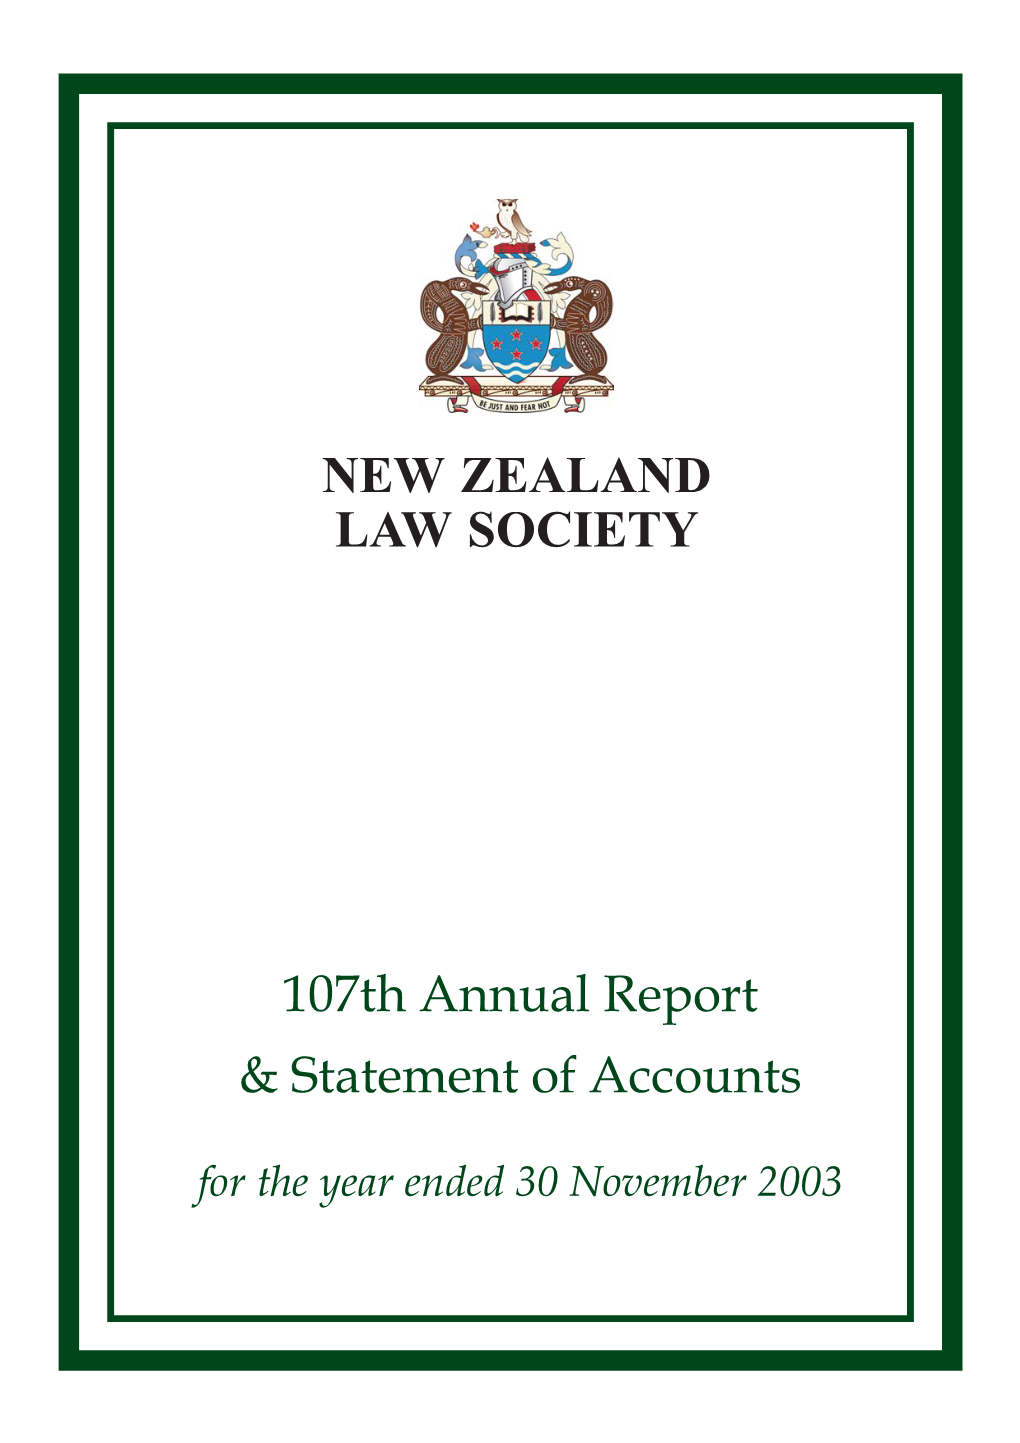 Annual Report 2003 PRESIDENT’S REVIEW